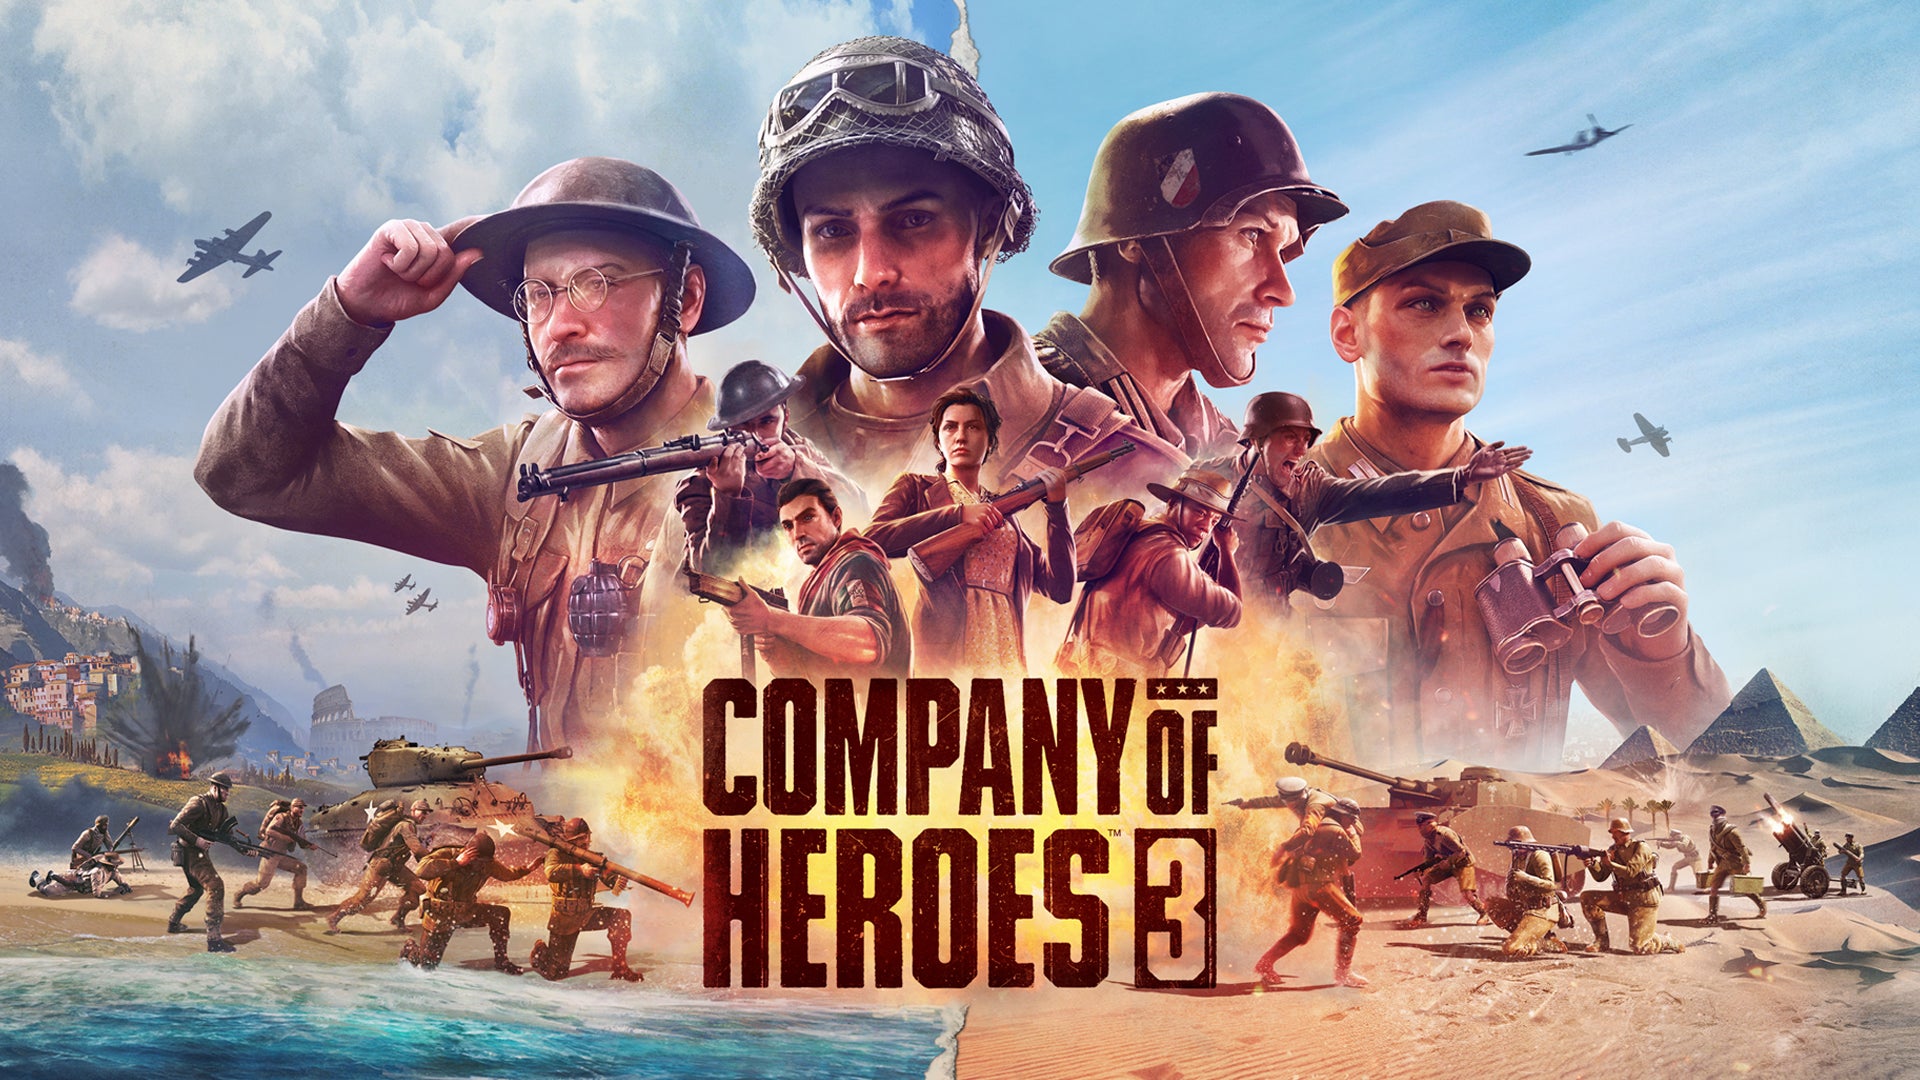 Key artwork showing the different soldiers and factions for Company Of Heroes 3